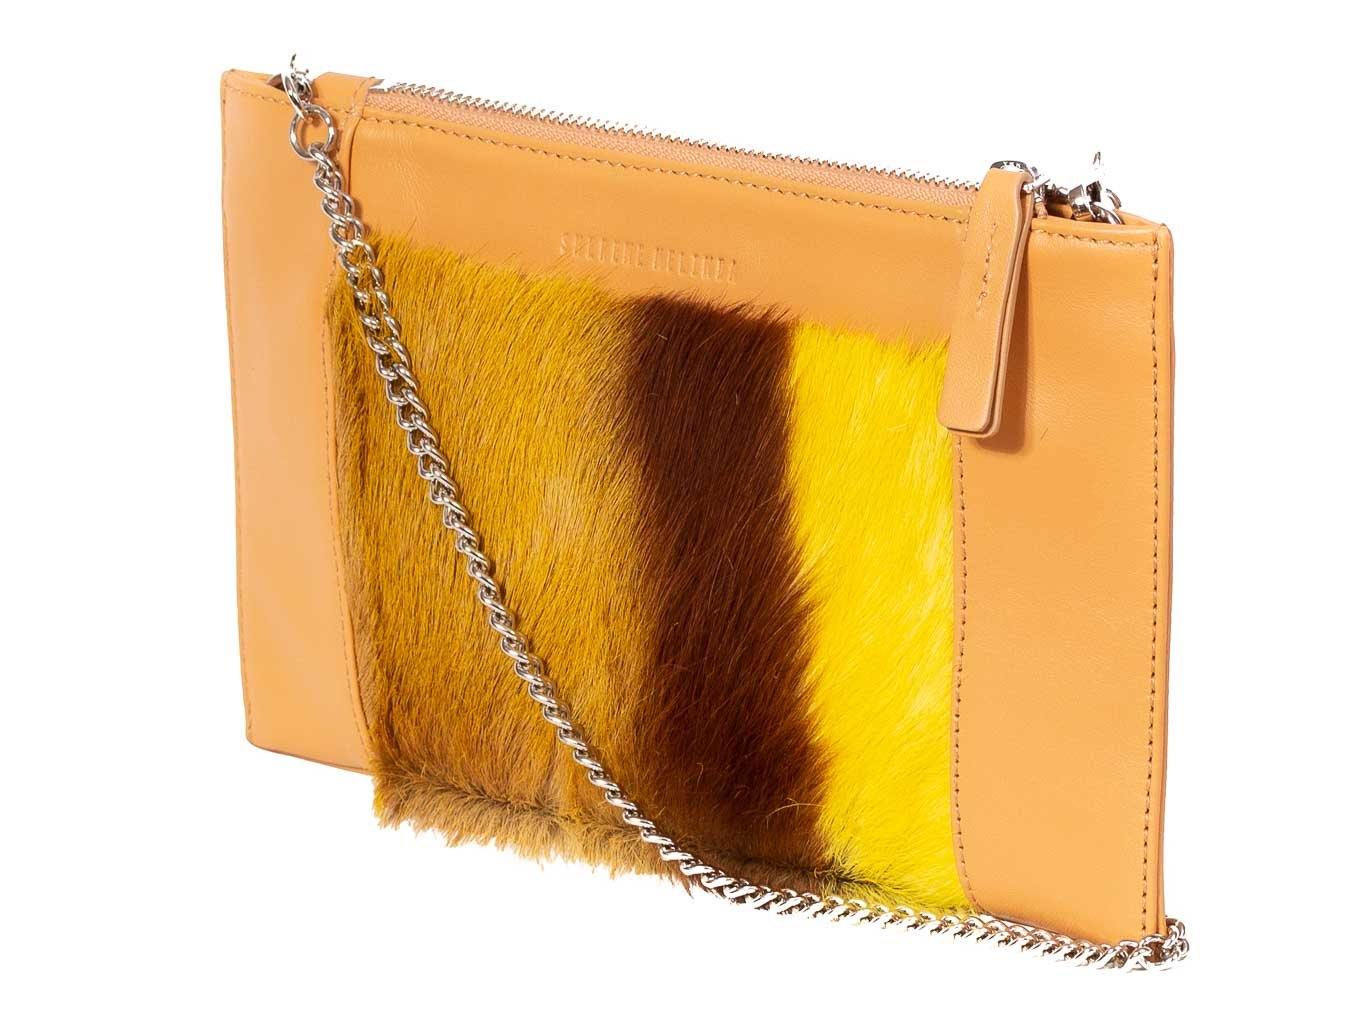 Clutch Springbok Handbag in Sunflower Yellow with a stripe feature by Sherene Melinda side angle strap